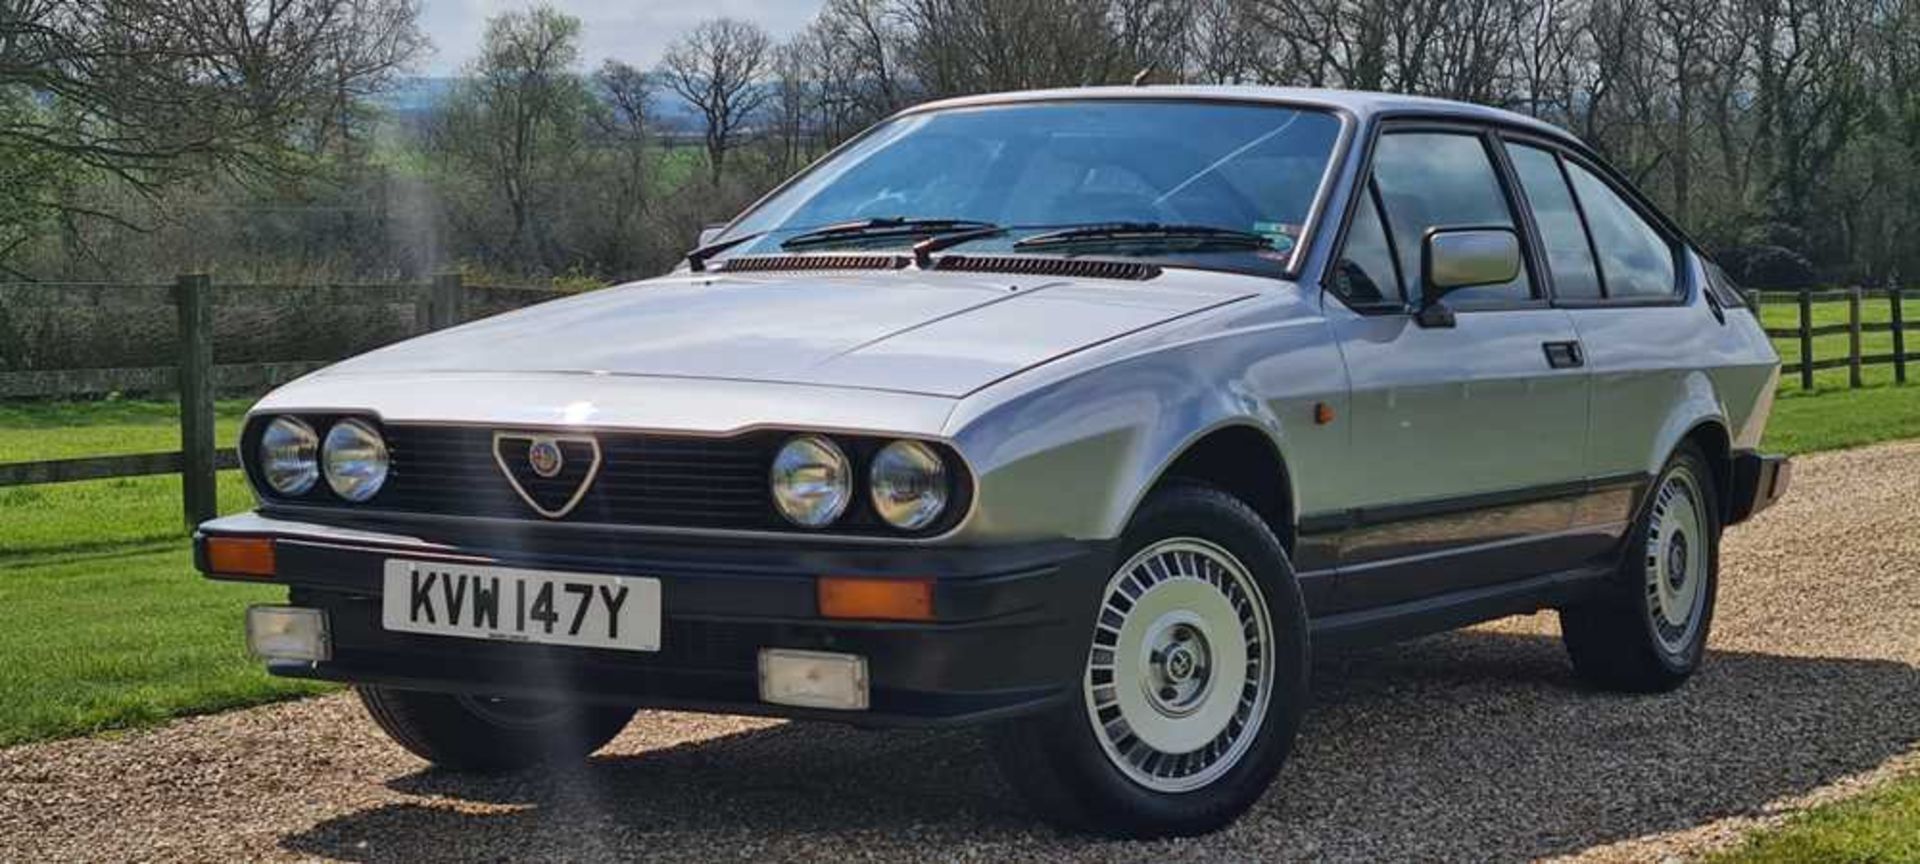 1983 Alfa Romeo GTV 2.0 litre Single family ownership and 48,000 miles from new - Image 13 of 51